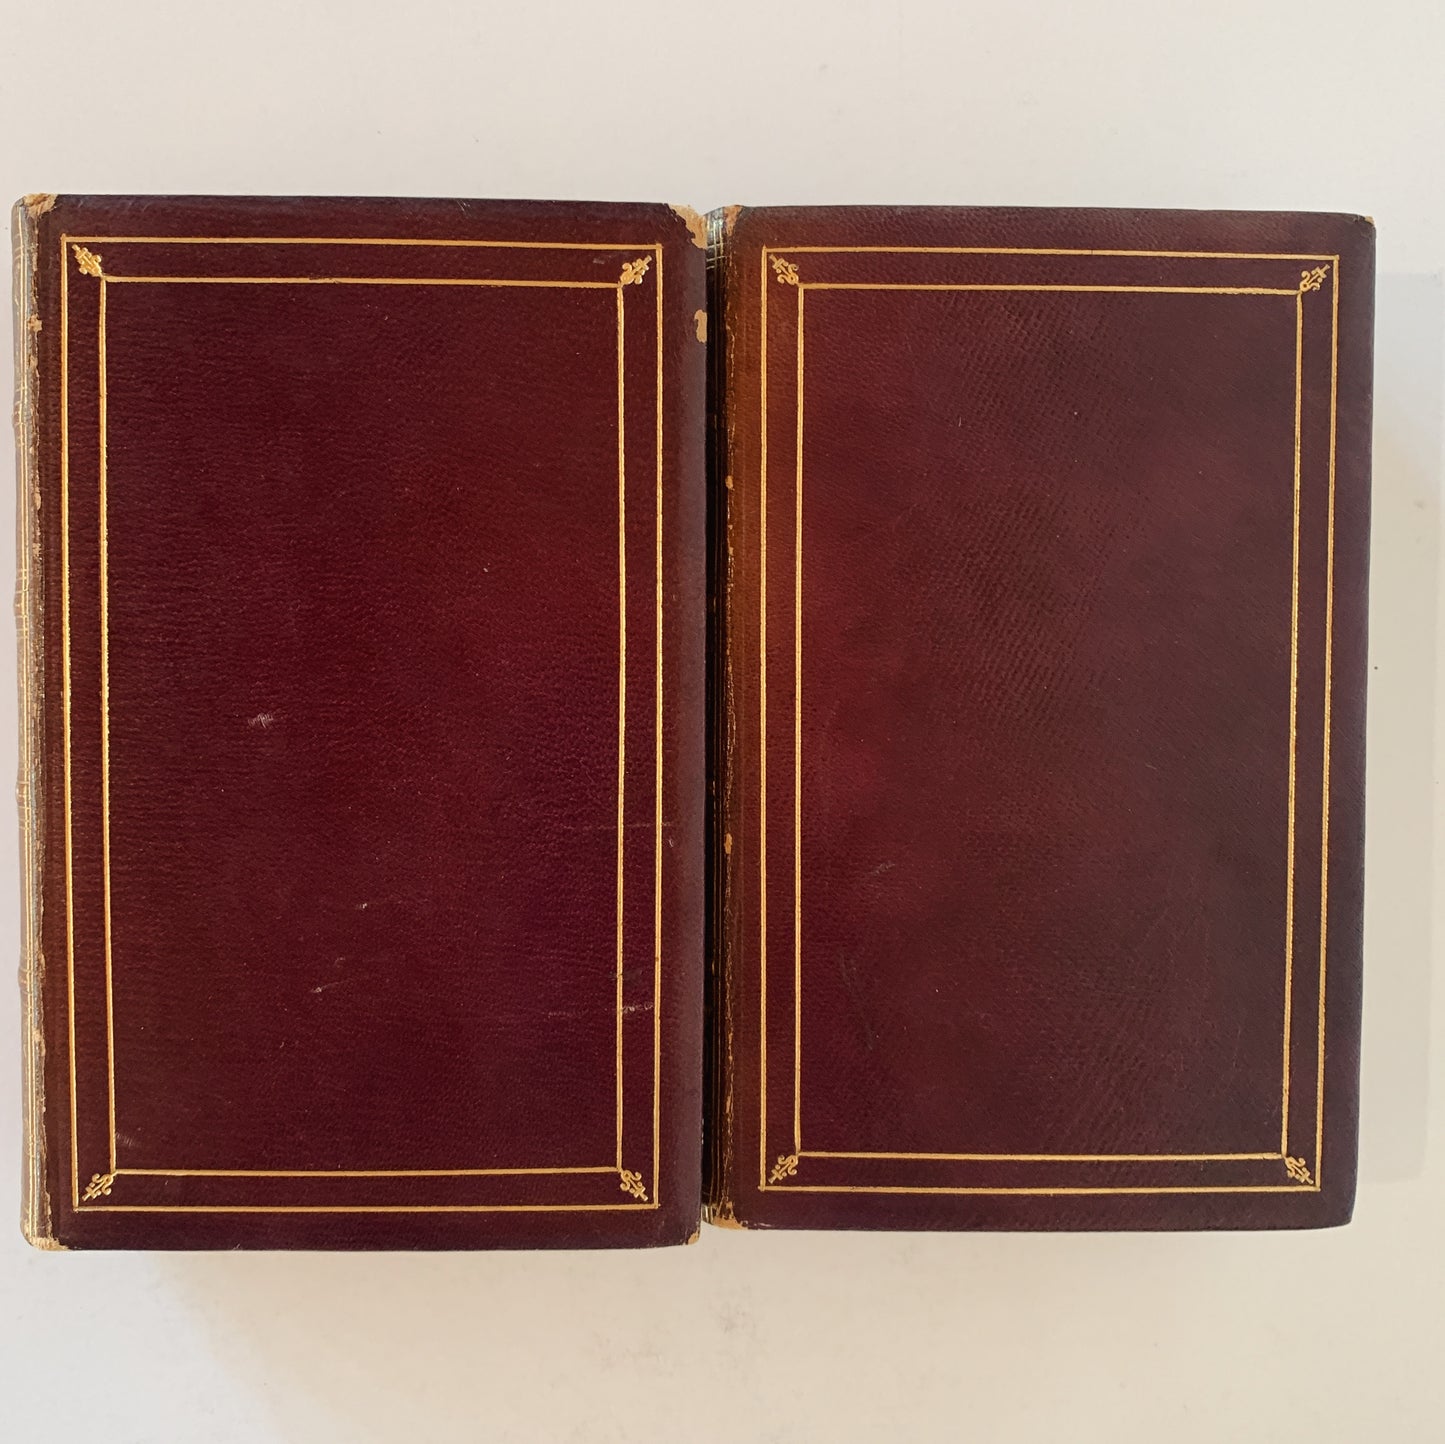 The Poetical Works of John Greenleaf Whittier, 1864, Complete in Two Volumes, Ticknor & Fields, Leather